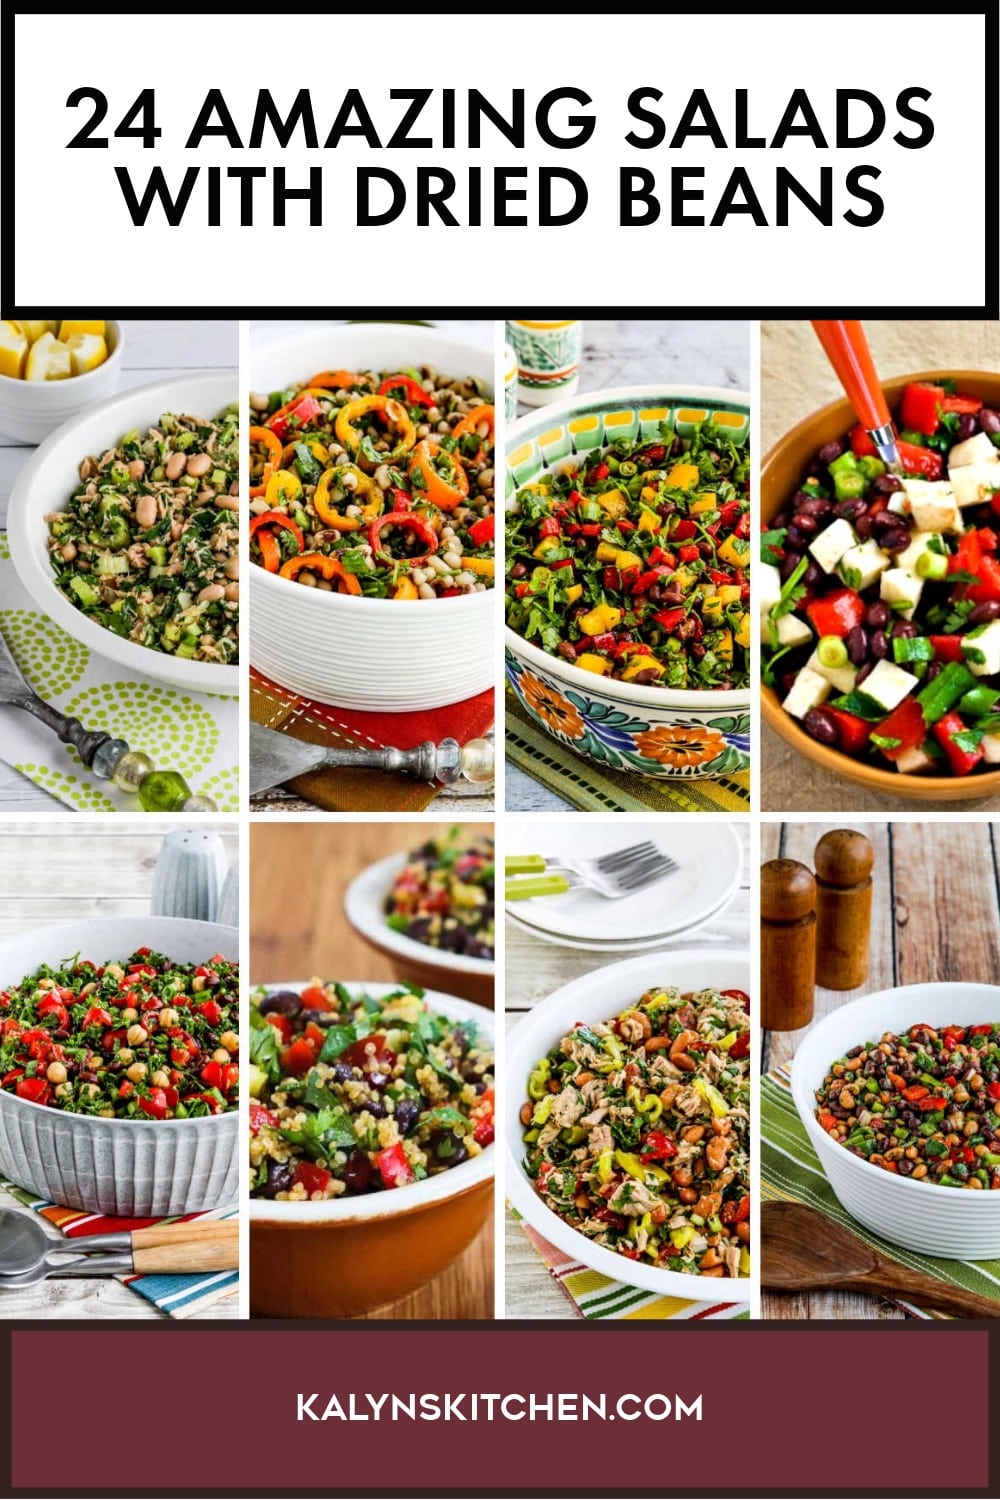 Pinterest image of 24 Amazing Salads with Dried Beans